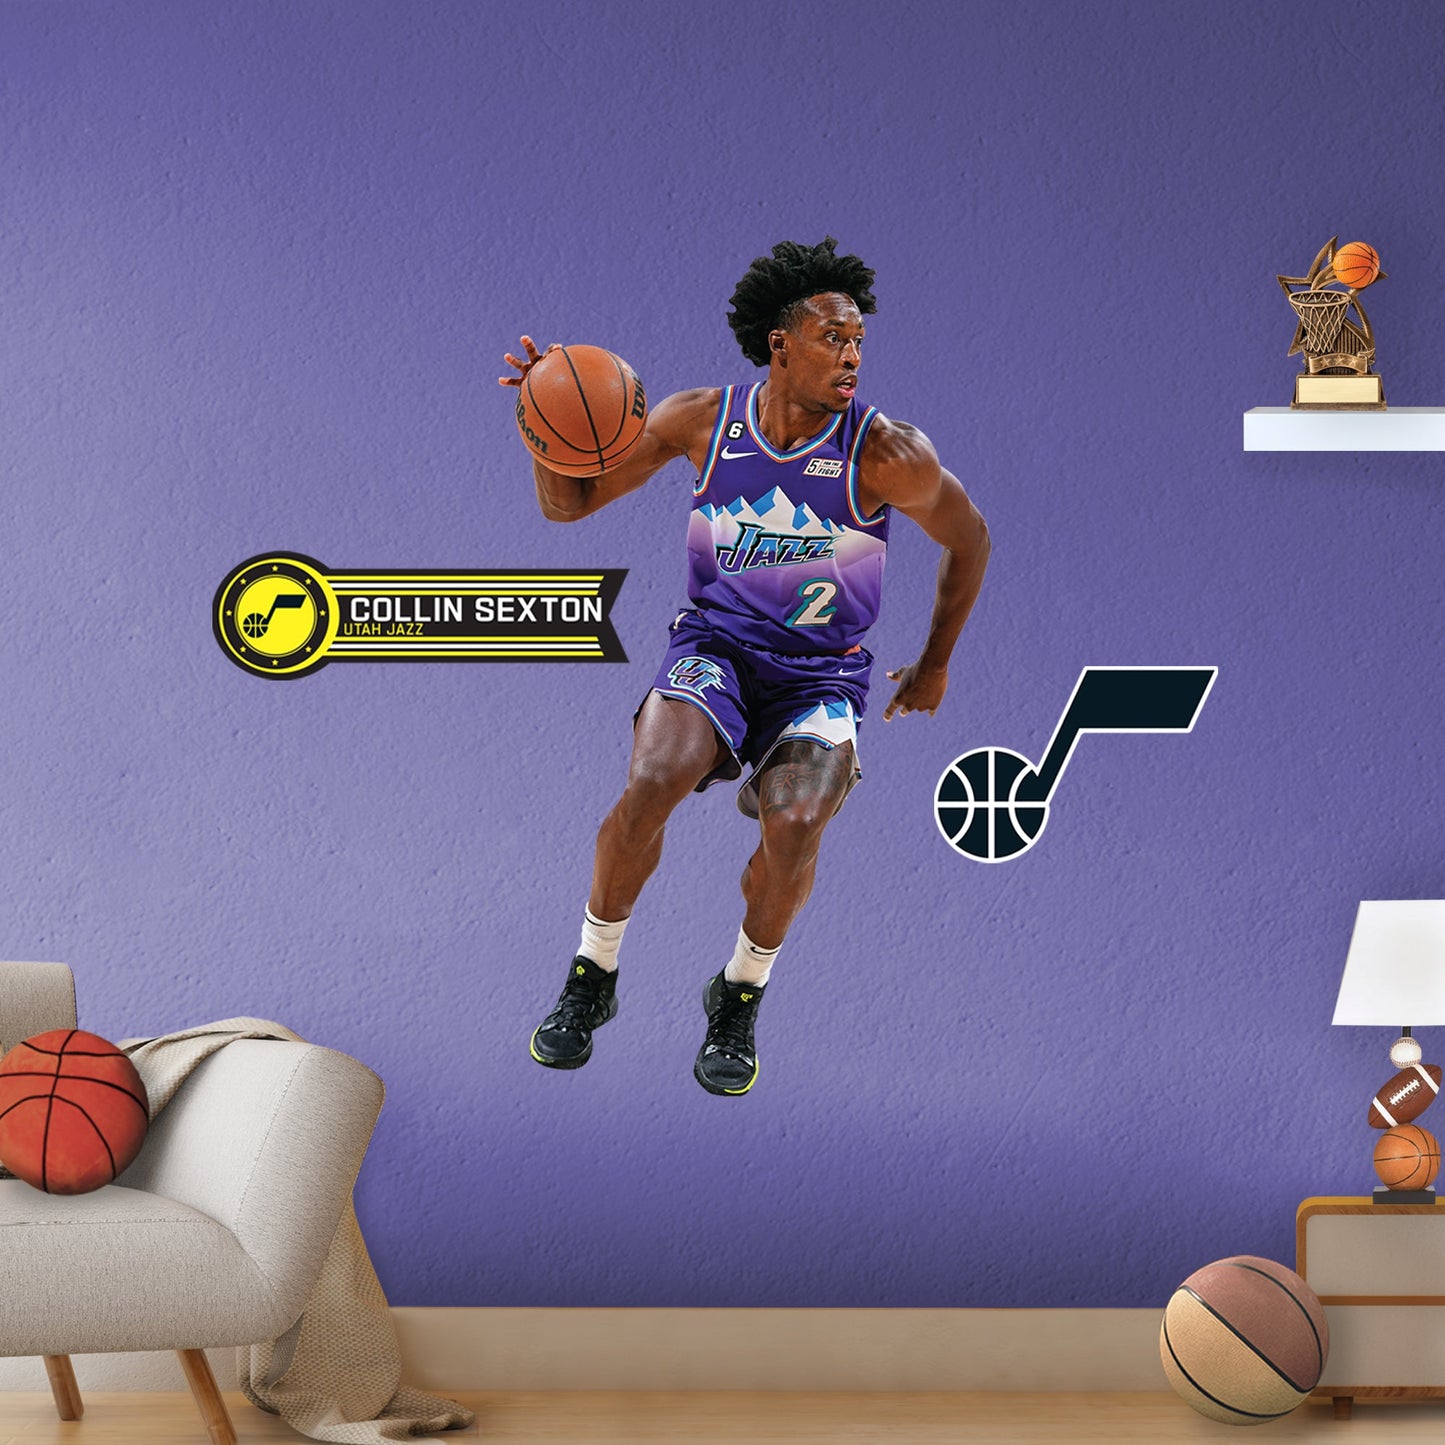 Utah Jazz: Collin Sexton Classic Jersey - Officially Licensed NBA Removable Adhesive Decal